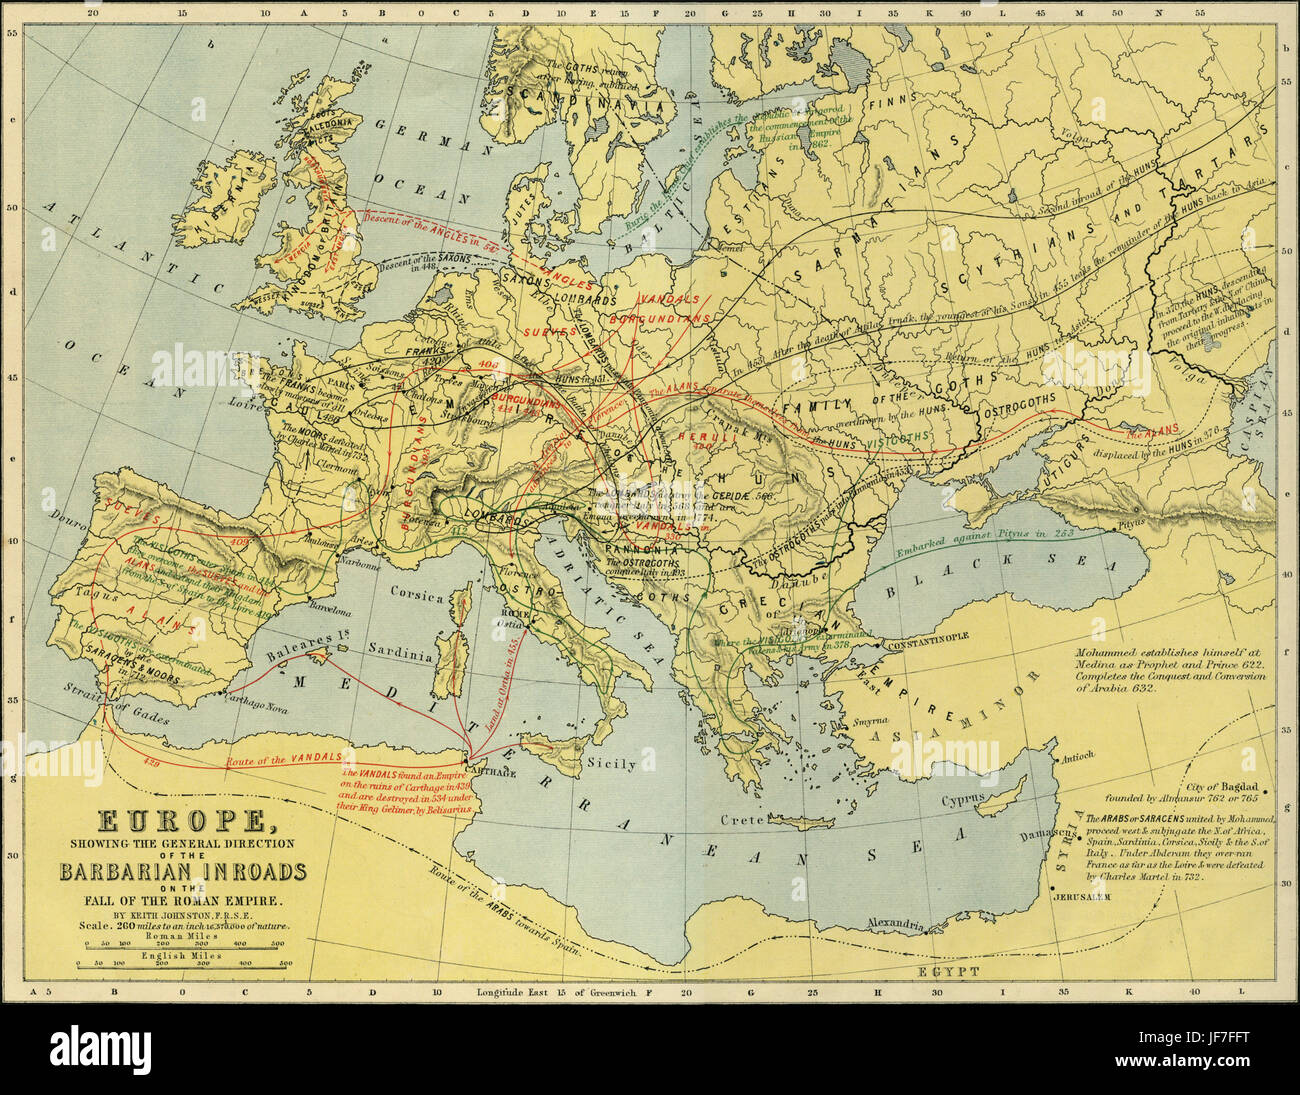 Map of Europe showing Barbarian inroads on the decline of the Roman Empire. Drawn by Keith Johnston F.R.S.E. Published in The Unrivalled Classical Atlas by W. and A.K. Johnston in 1877. Stock Photo